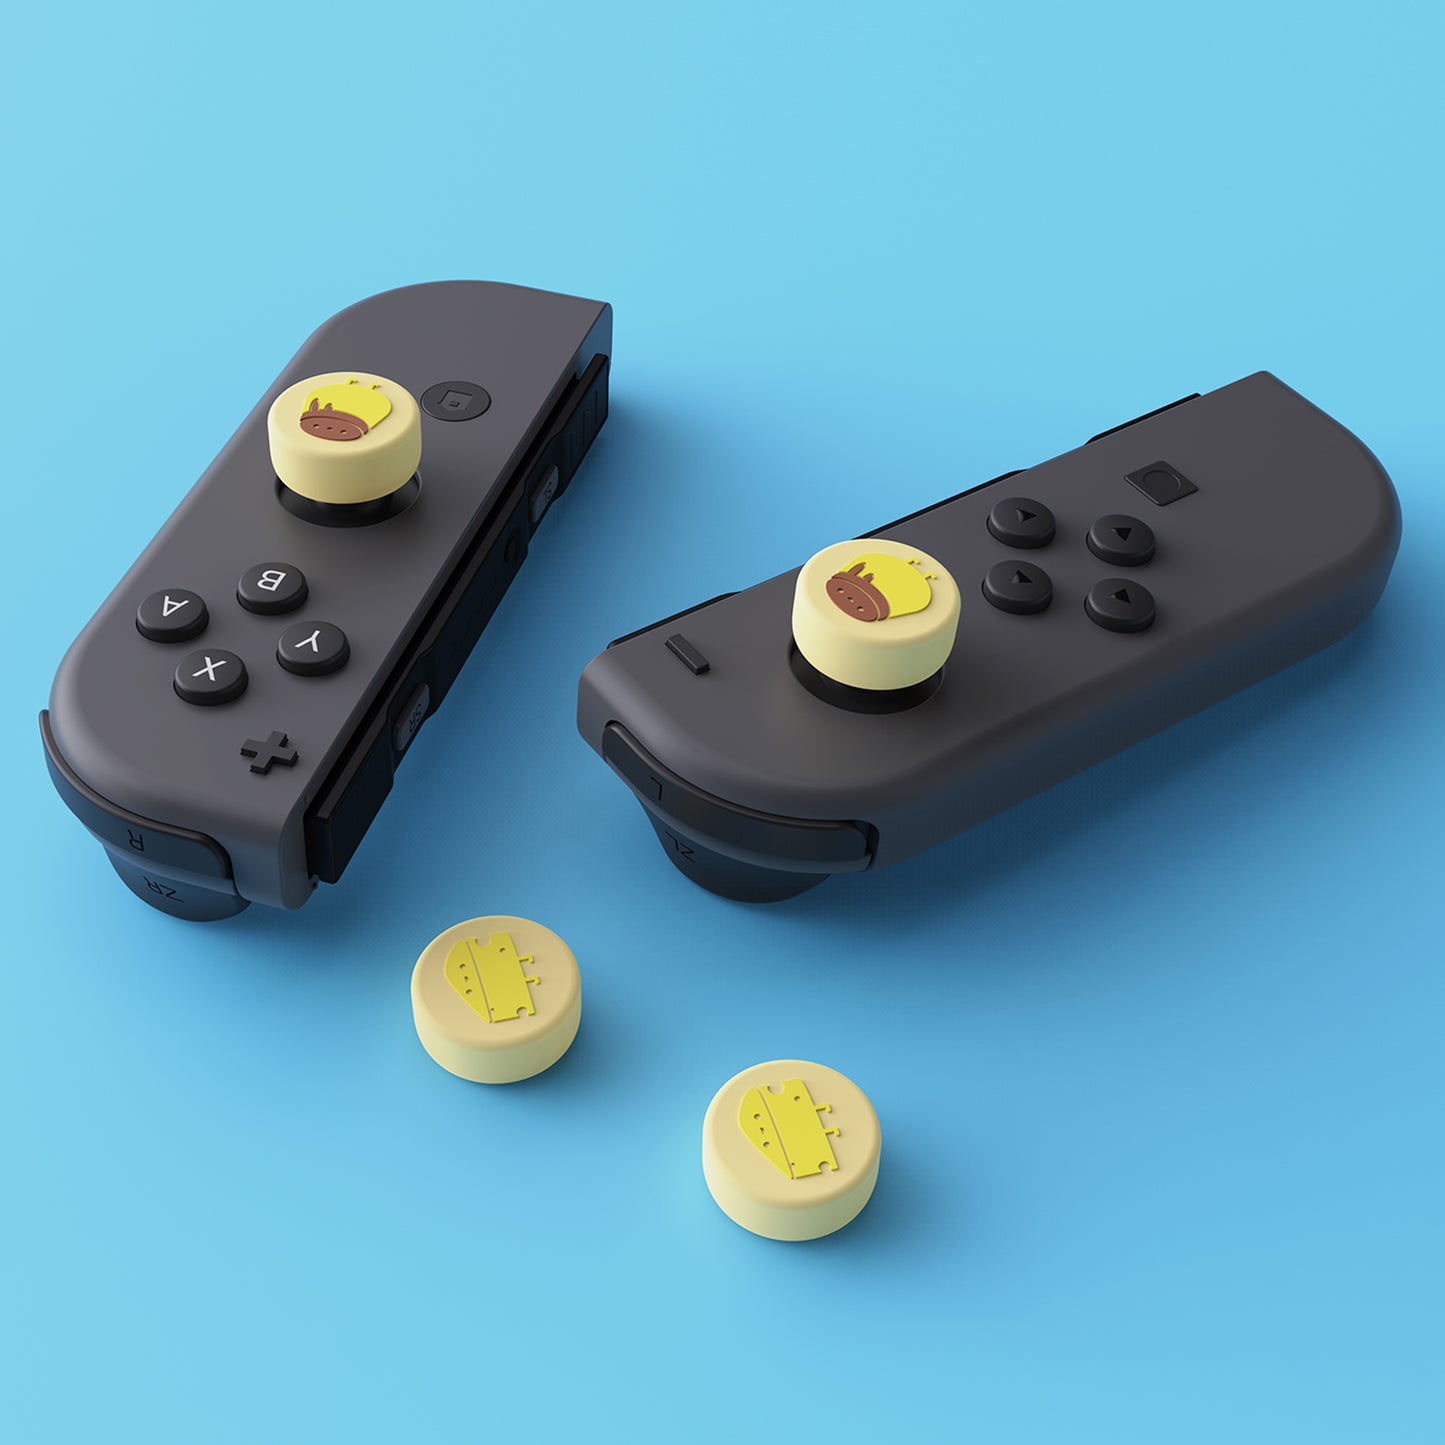 PlayVital Cheese & Pudding Cute Switch Thumb Grip Caps, Joystick Caps for Nintendo Switch Lite, Silicone Analog Cover Thumbstick Grips for Switch OLED Joycon - Cream Yellow - NJM1101 playvital